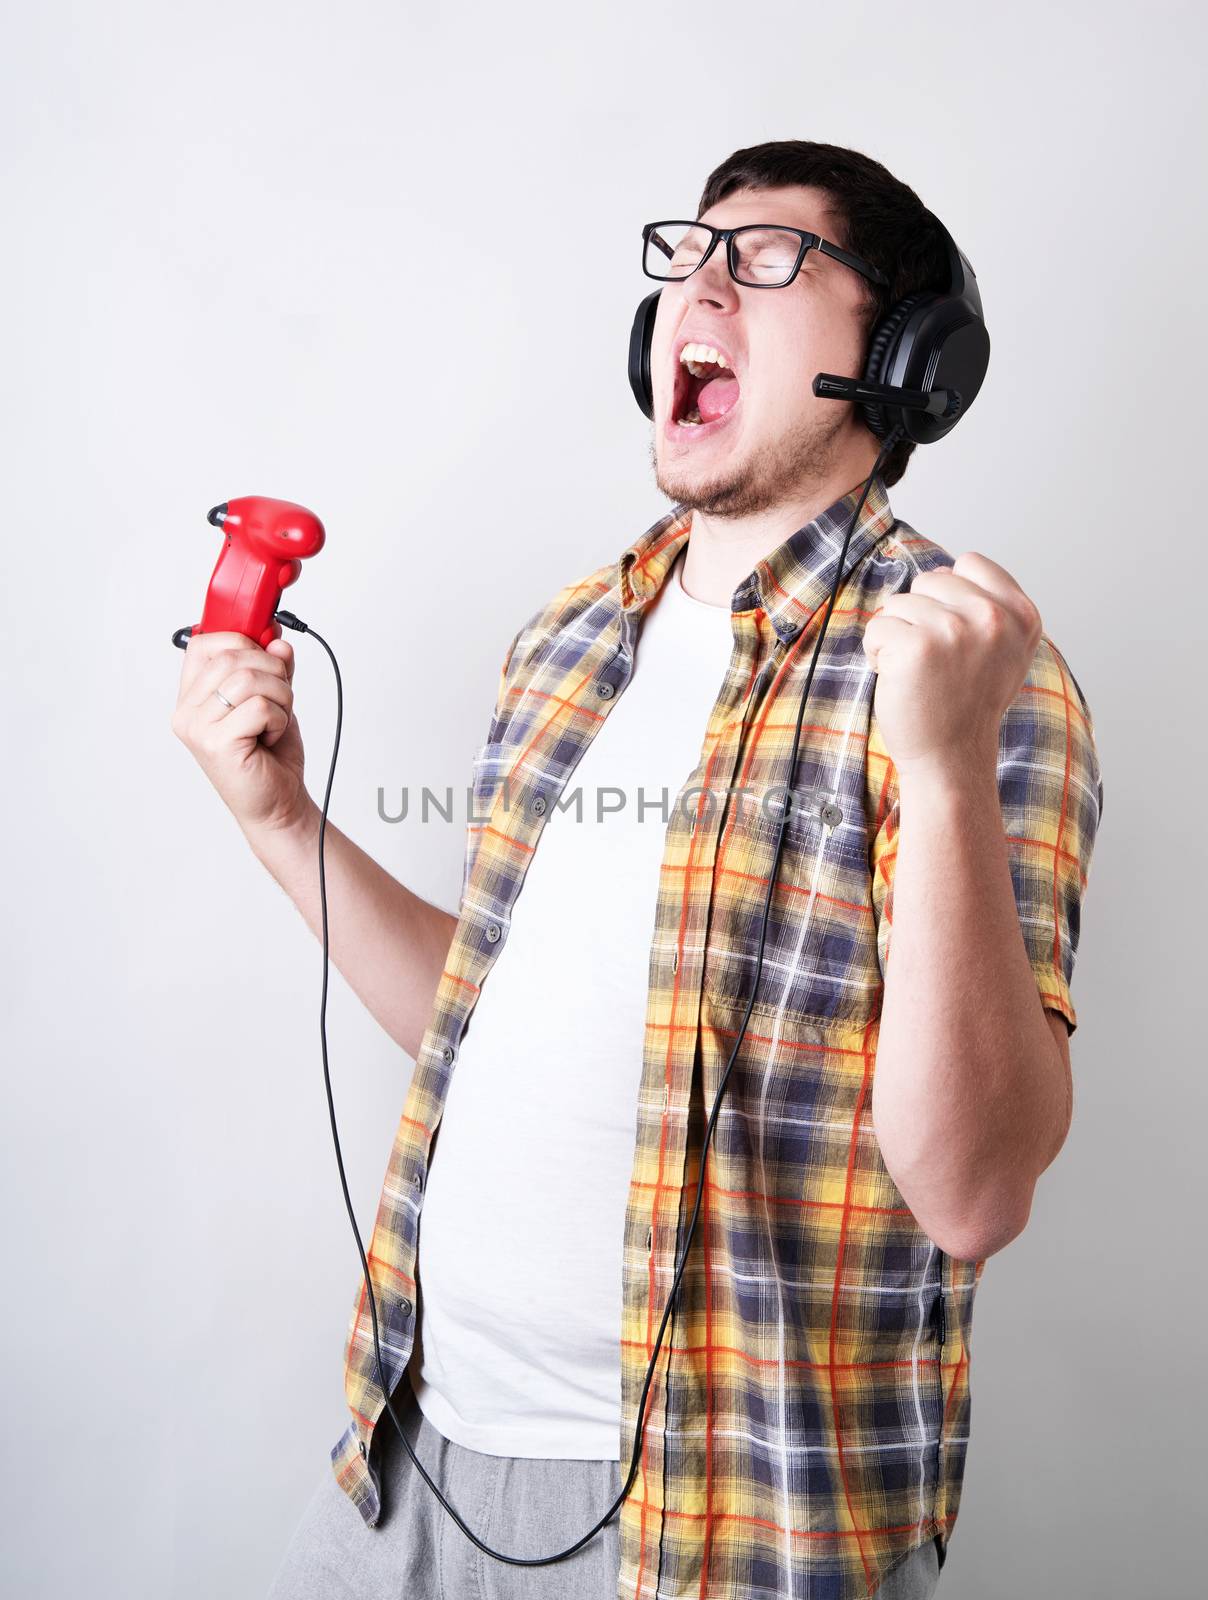 Funny young man screaming playing video games holding a joystick isolated on gray background by Desperada